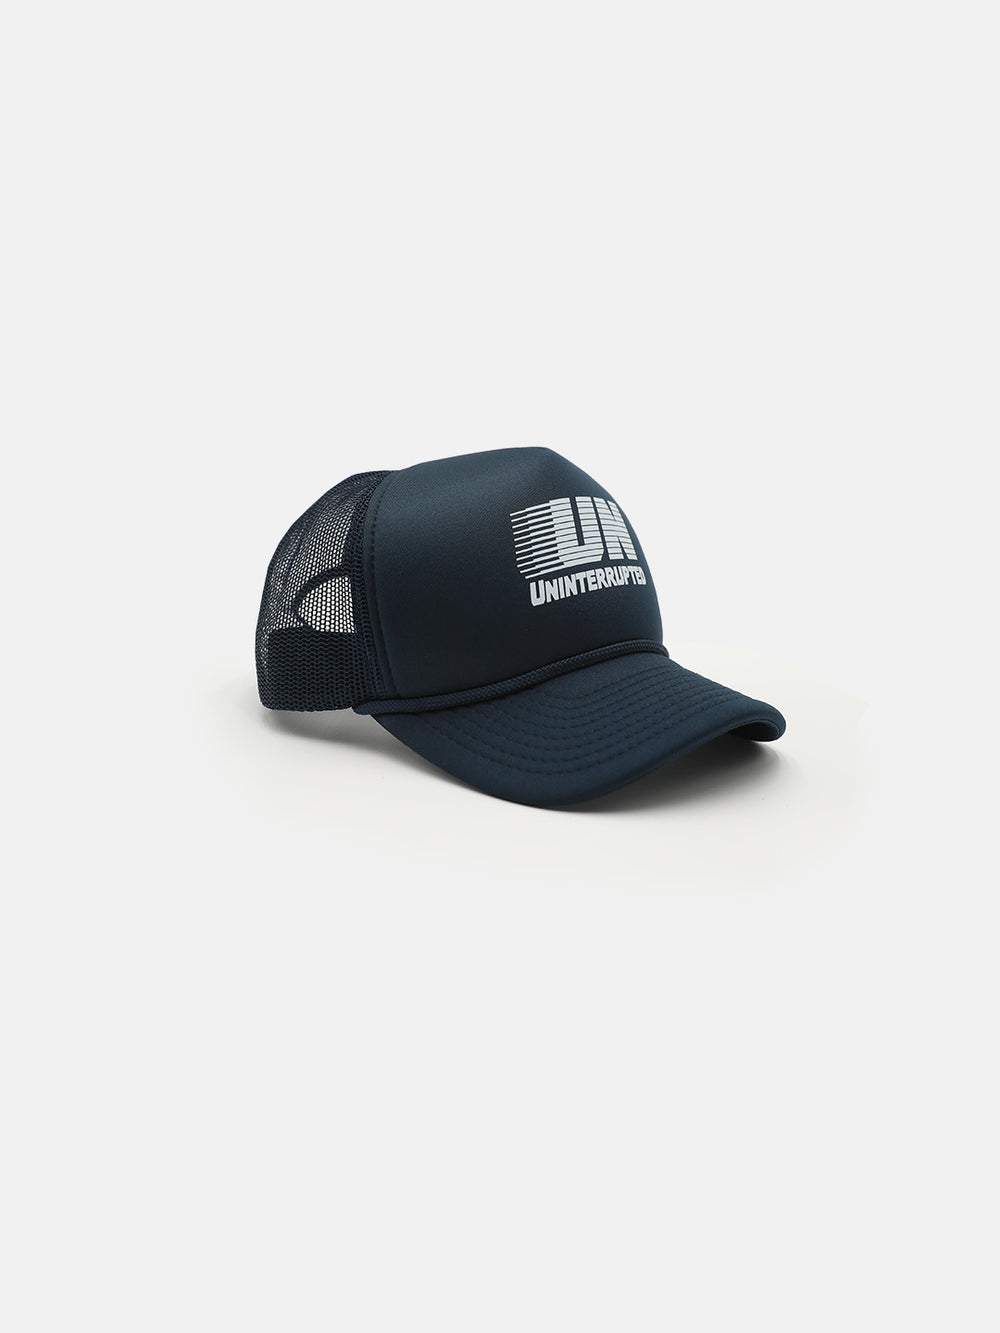 Trucker Hat Fishing Black Snapback Hats for Men Trendy Trucker Hats Sorry I  Missed Your Call I Wass On The Otherr Line L at  Men's Clothing store